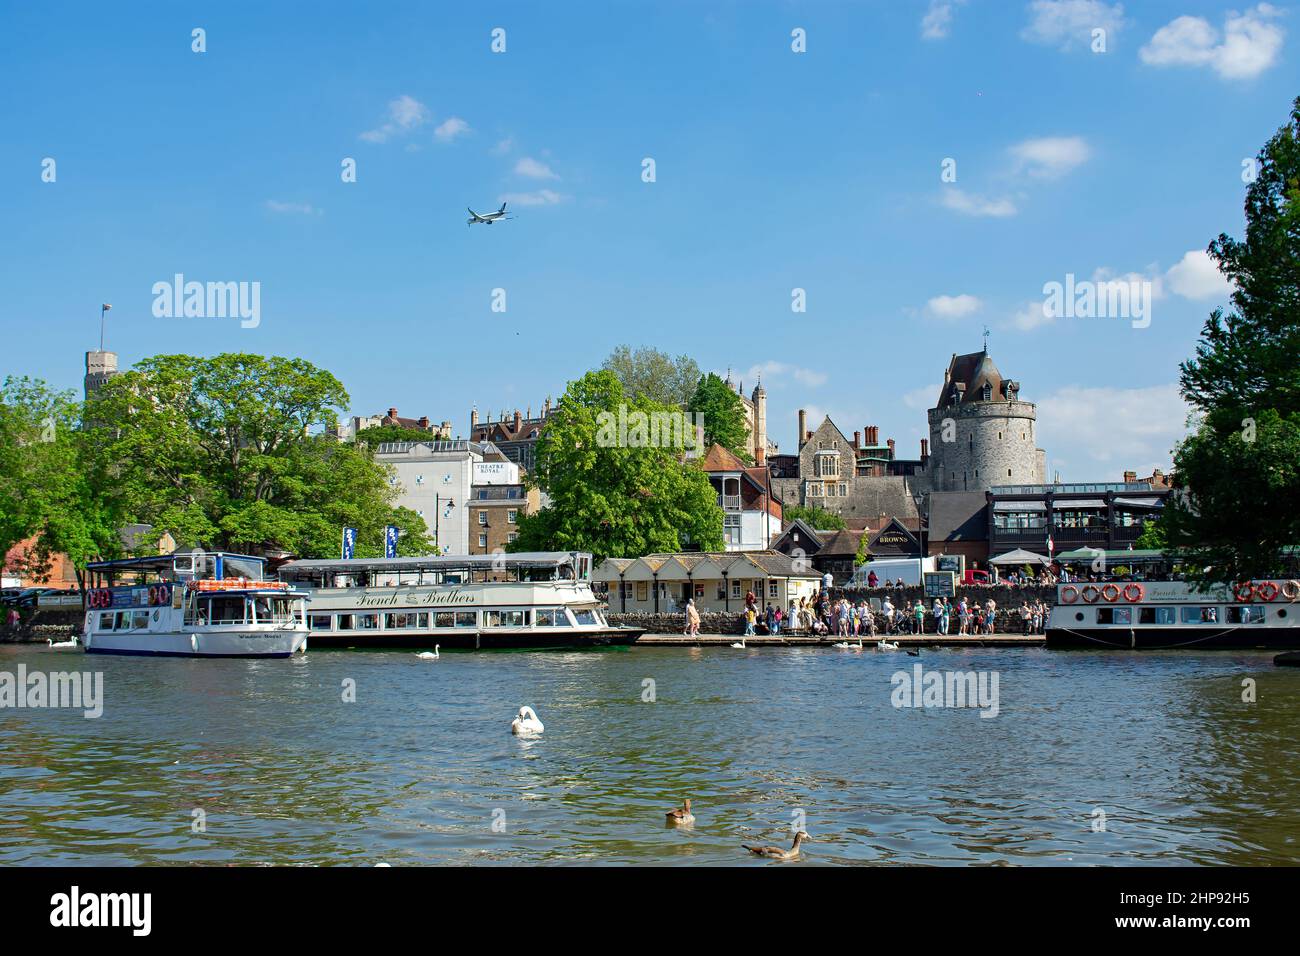 The Town and Castle of Windsor, seen from the Eton side of the River Thames.  Tour boats dock along the river.  Swans and Geese swim in the river.  UK Stock Photo